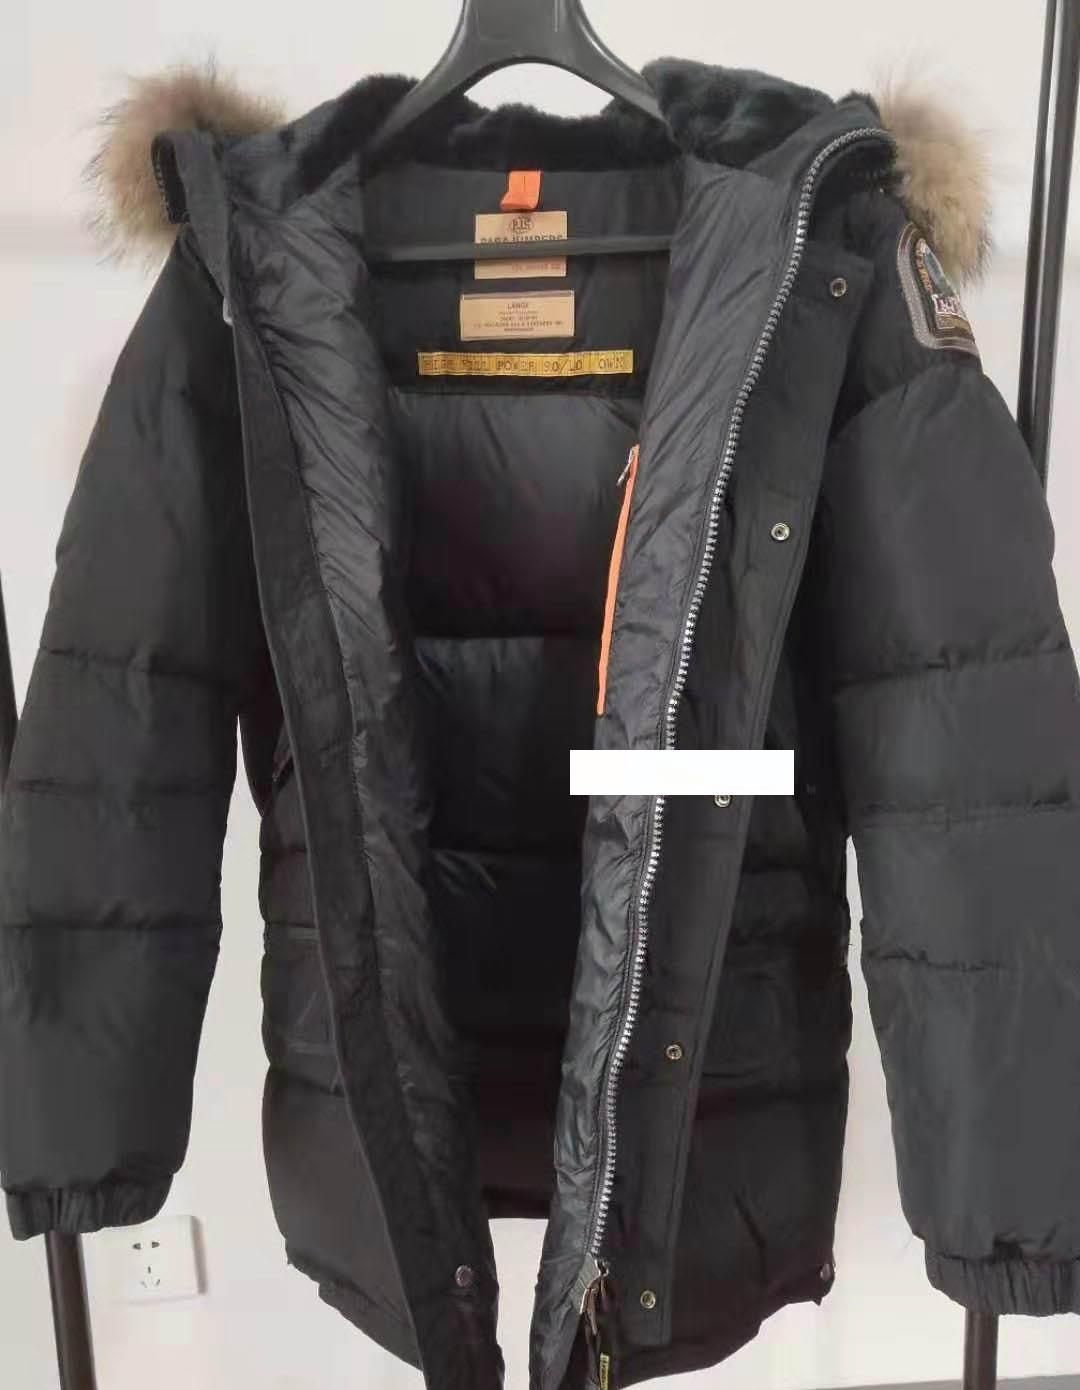 parajumpers dhgate